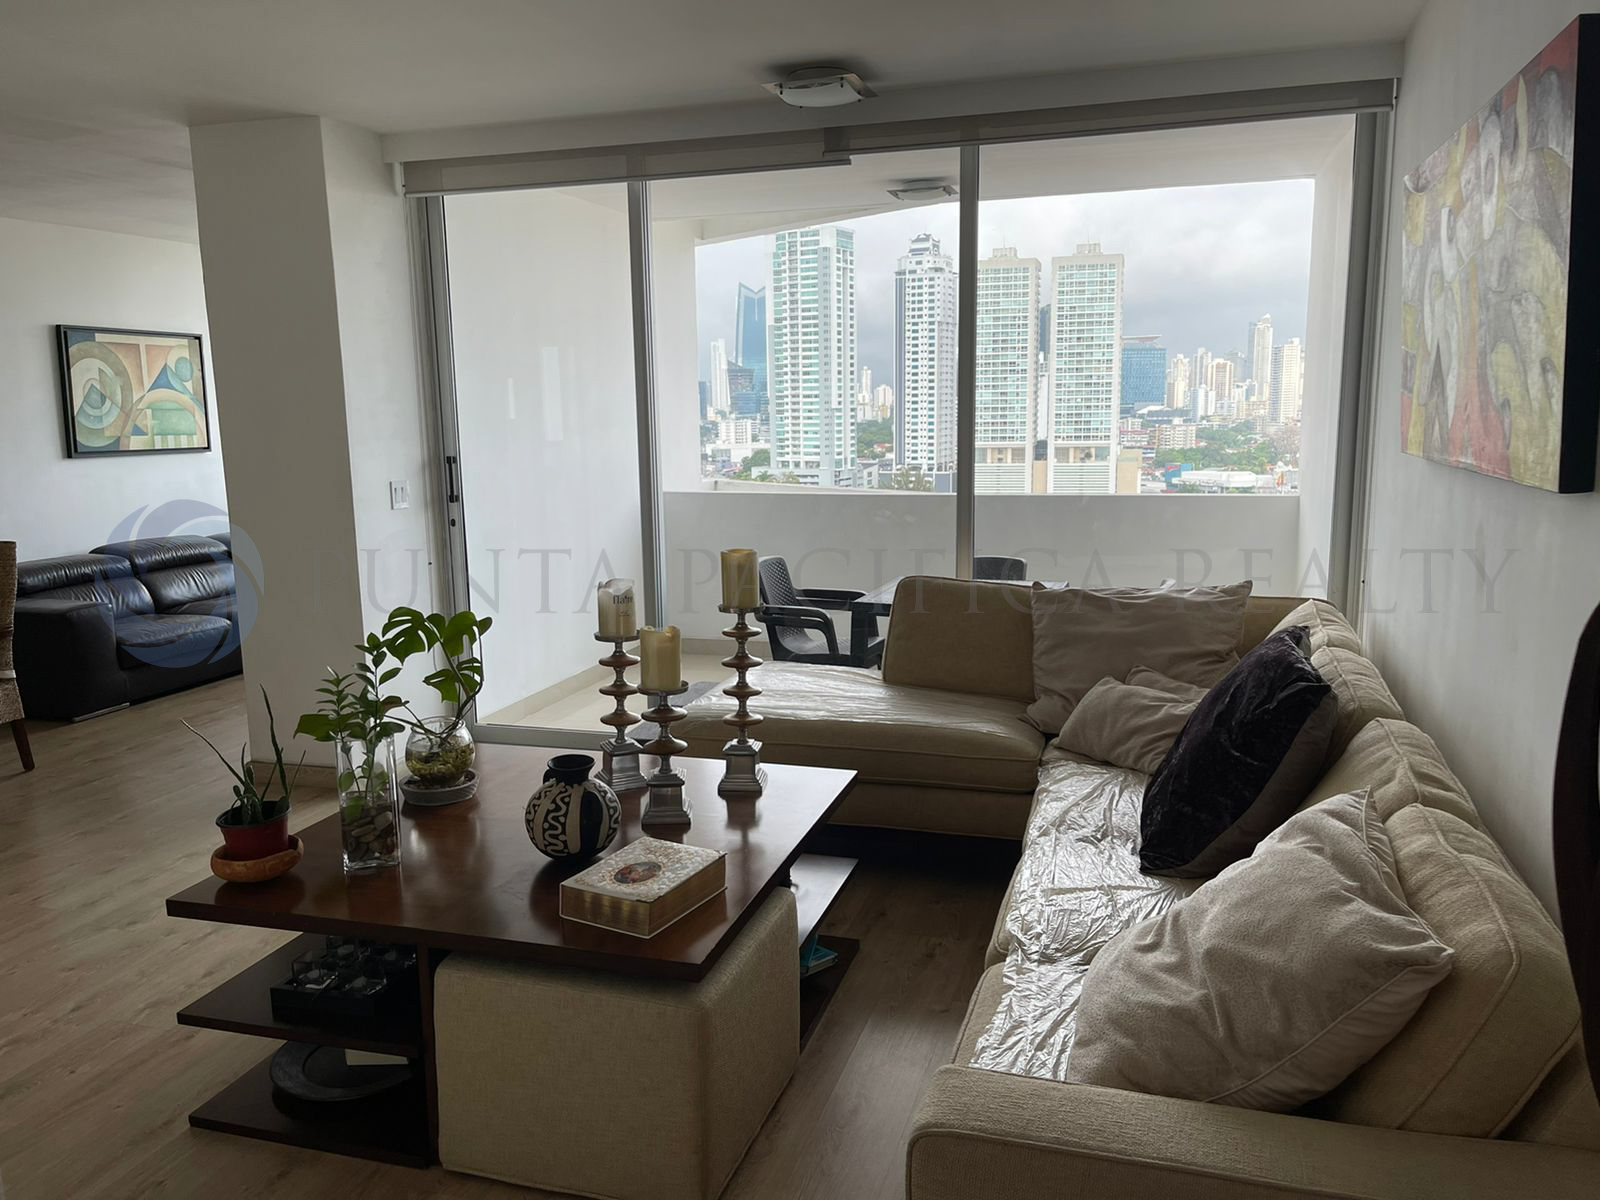 For Sale | 3-Bedroom | Great Views | Unfurnished In P.H. Infinity